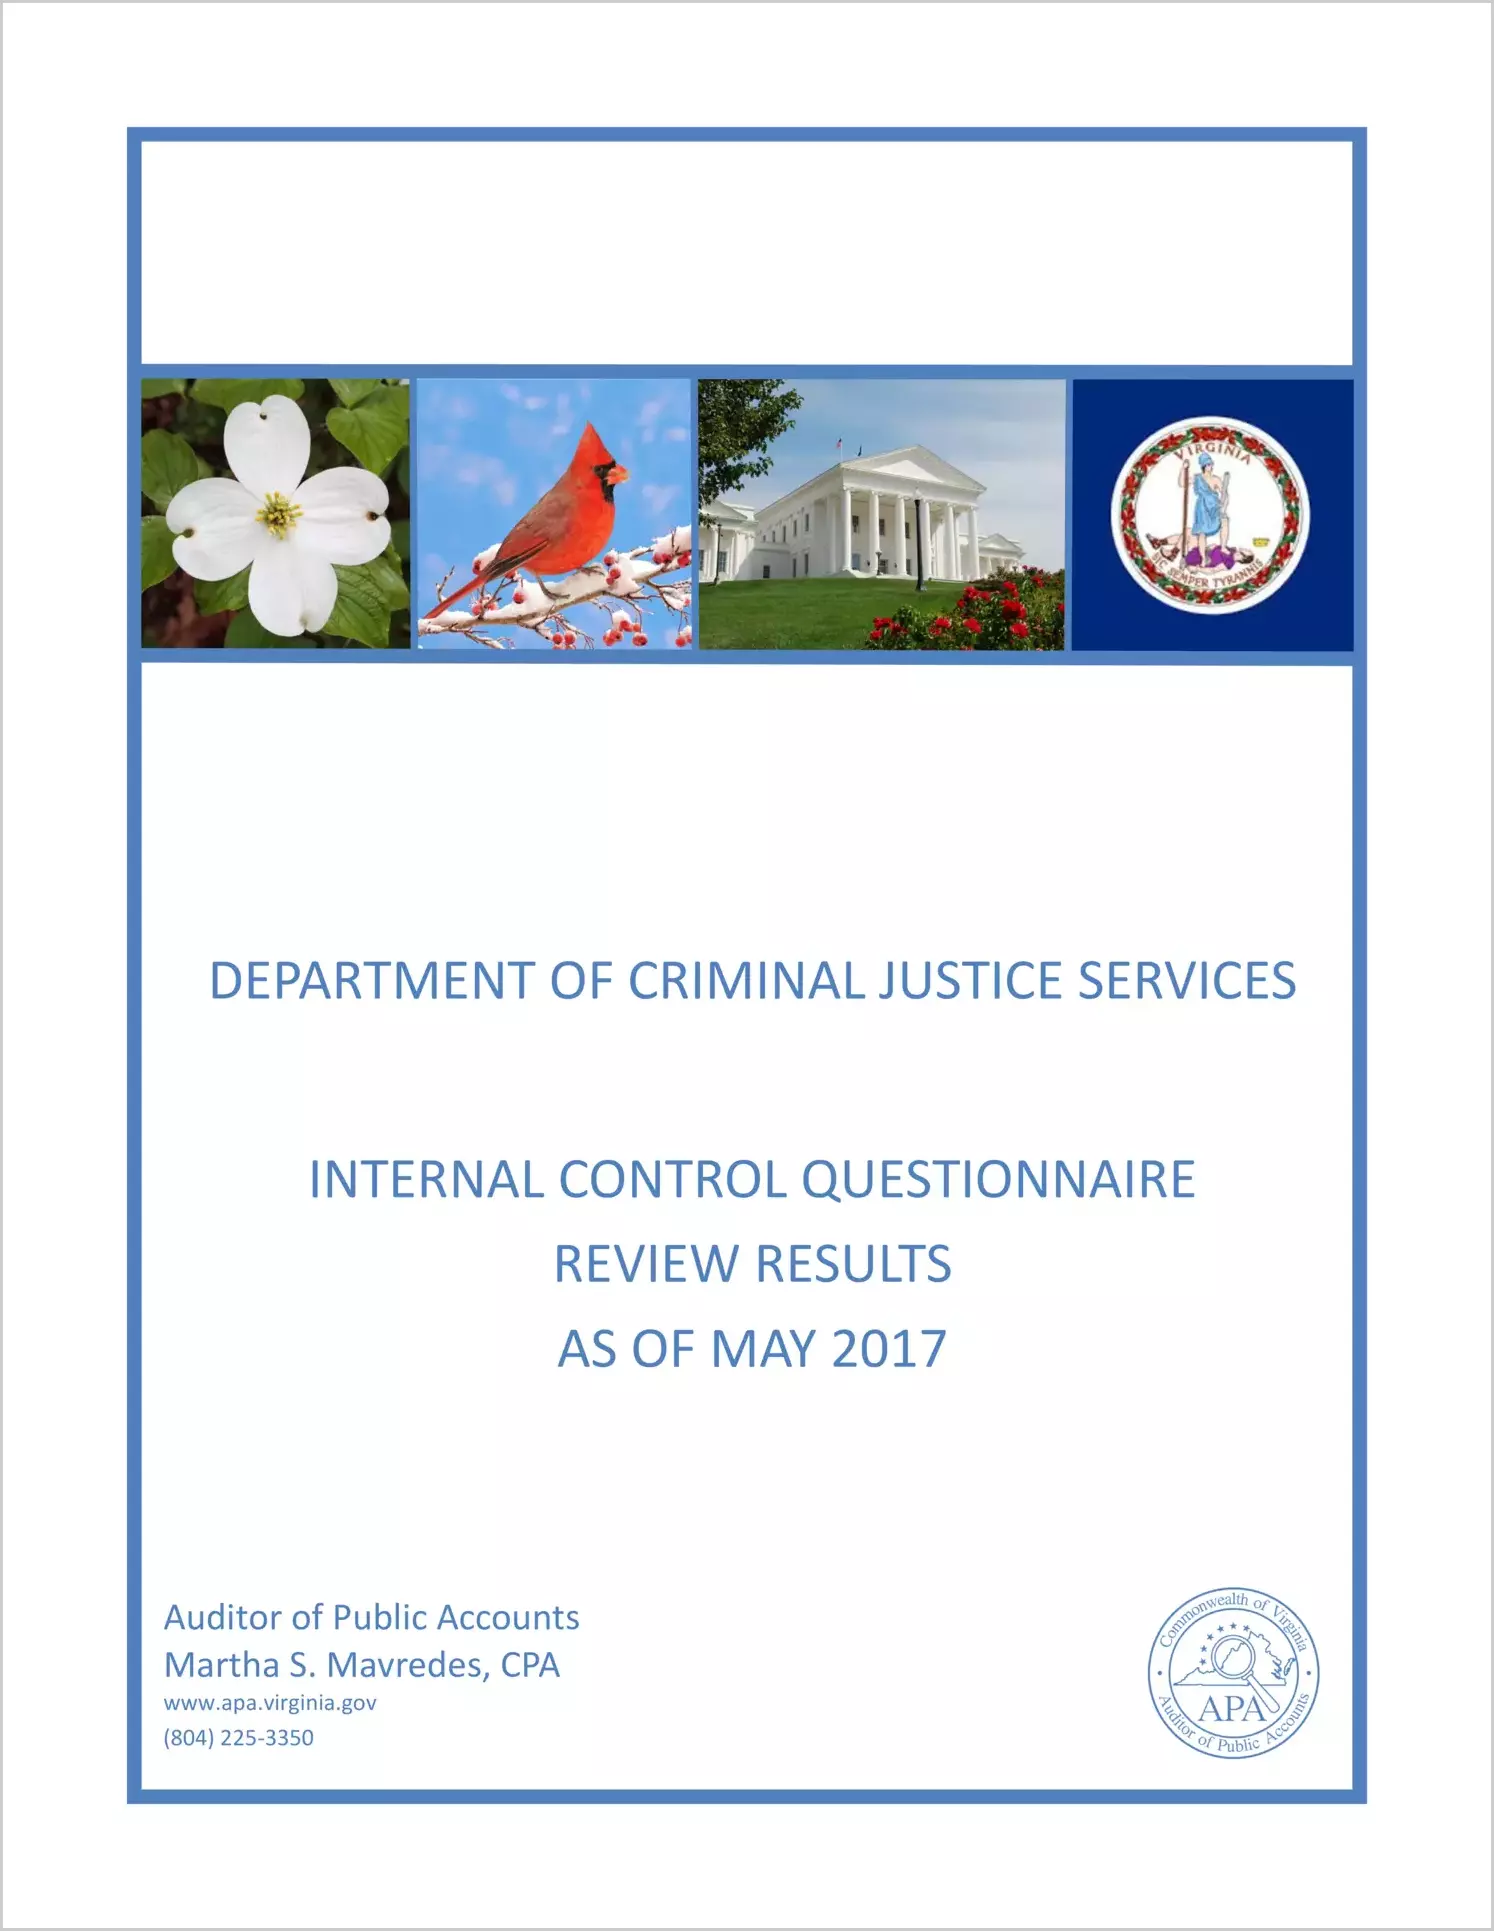 Department of Criminal Justice Services Internal Control Questionnaire Review Results as of May 2017